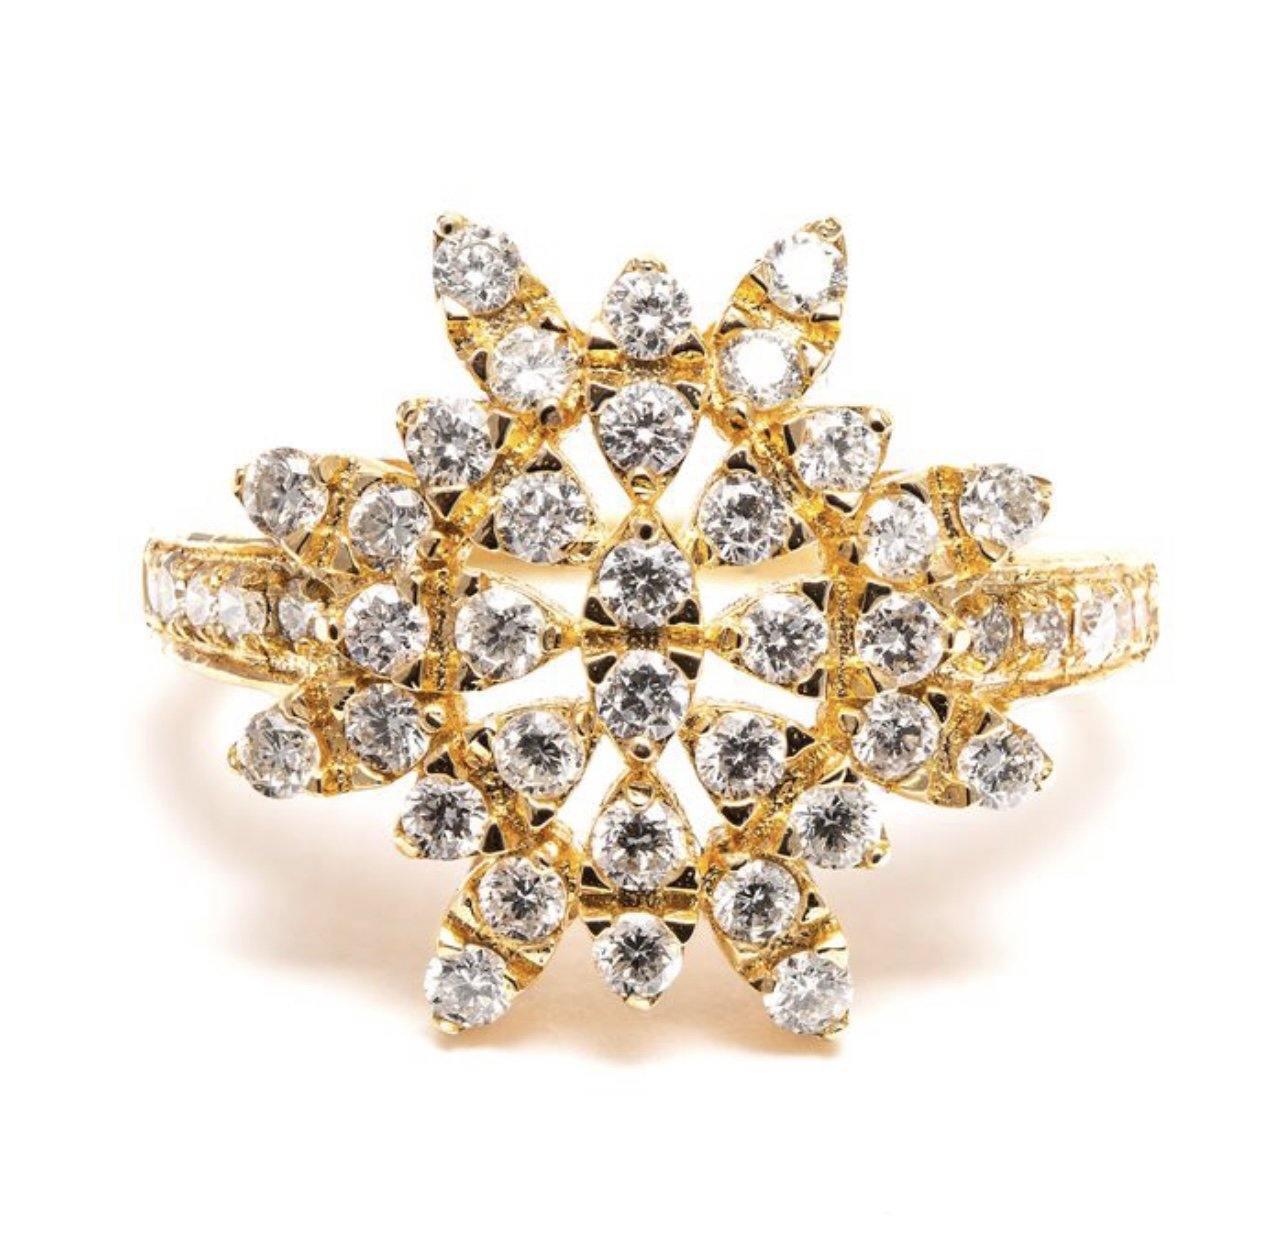 A Magnificent Modern Cocktail, or everyday use, Diamond Cluster Ring, that is a guaranteed head turner.

This Magnificent ring, is Accompanied by a AIG Certificate with the following Gradings:  

Stone Type: Natural Diamonds
Diamond Count: 44